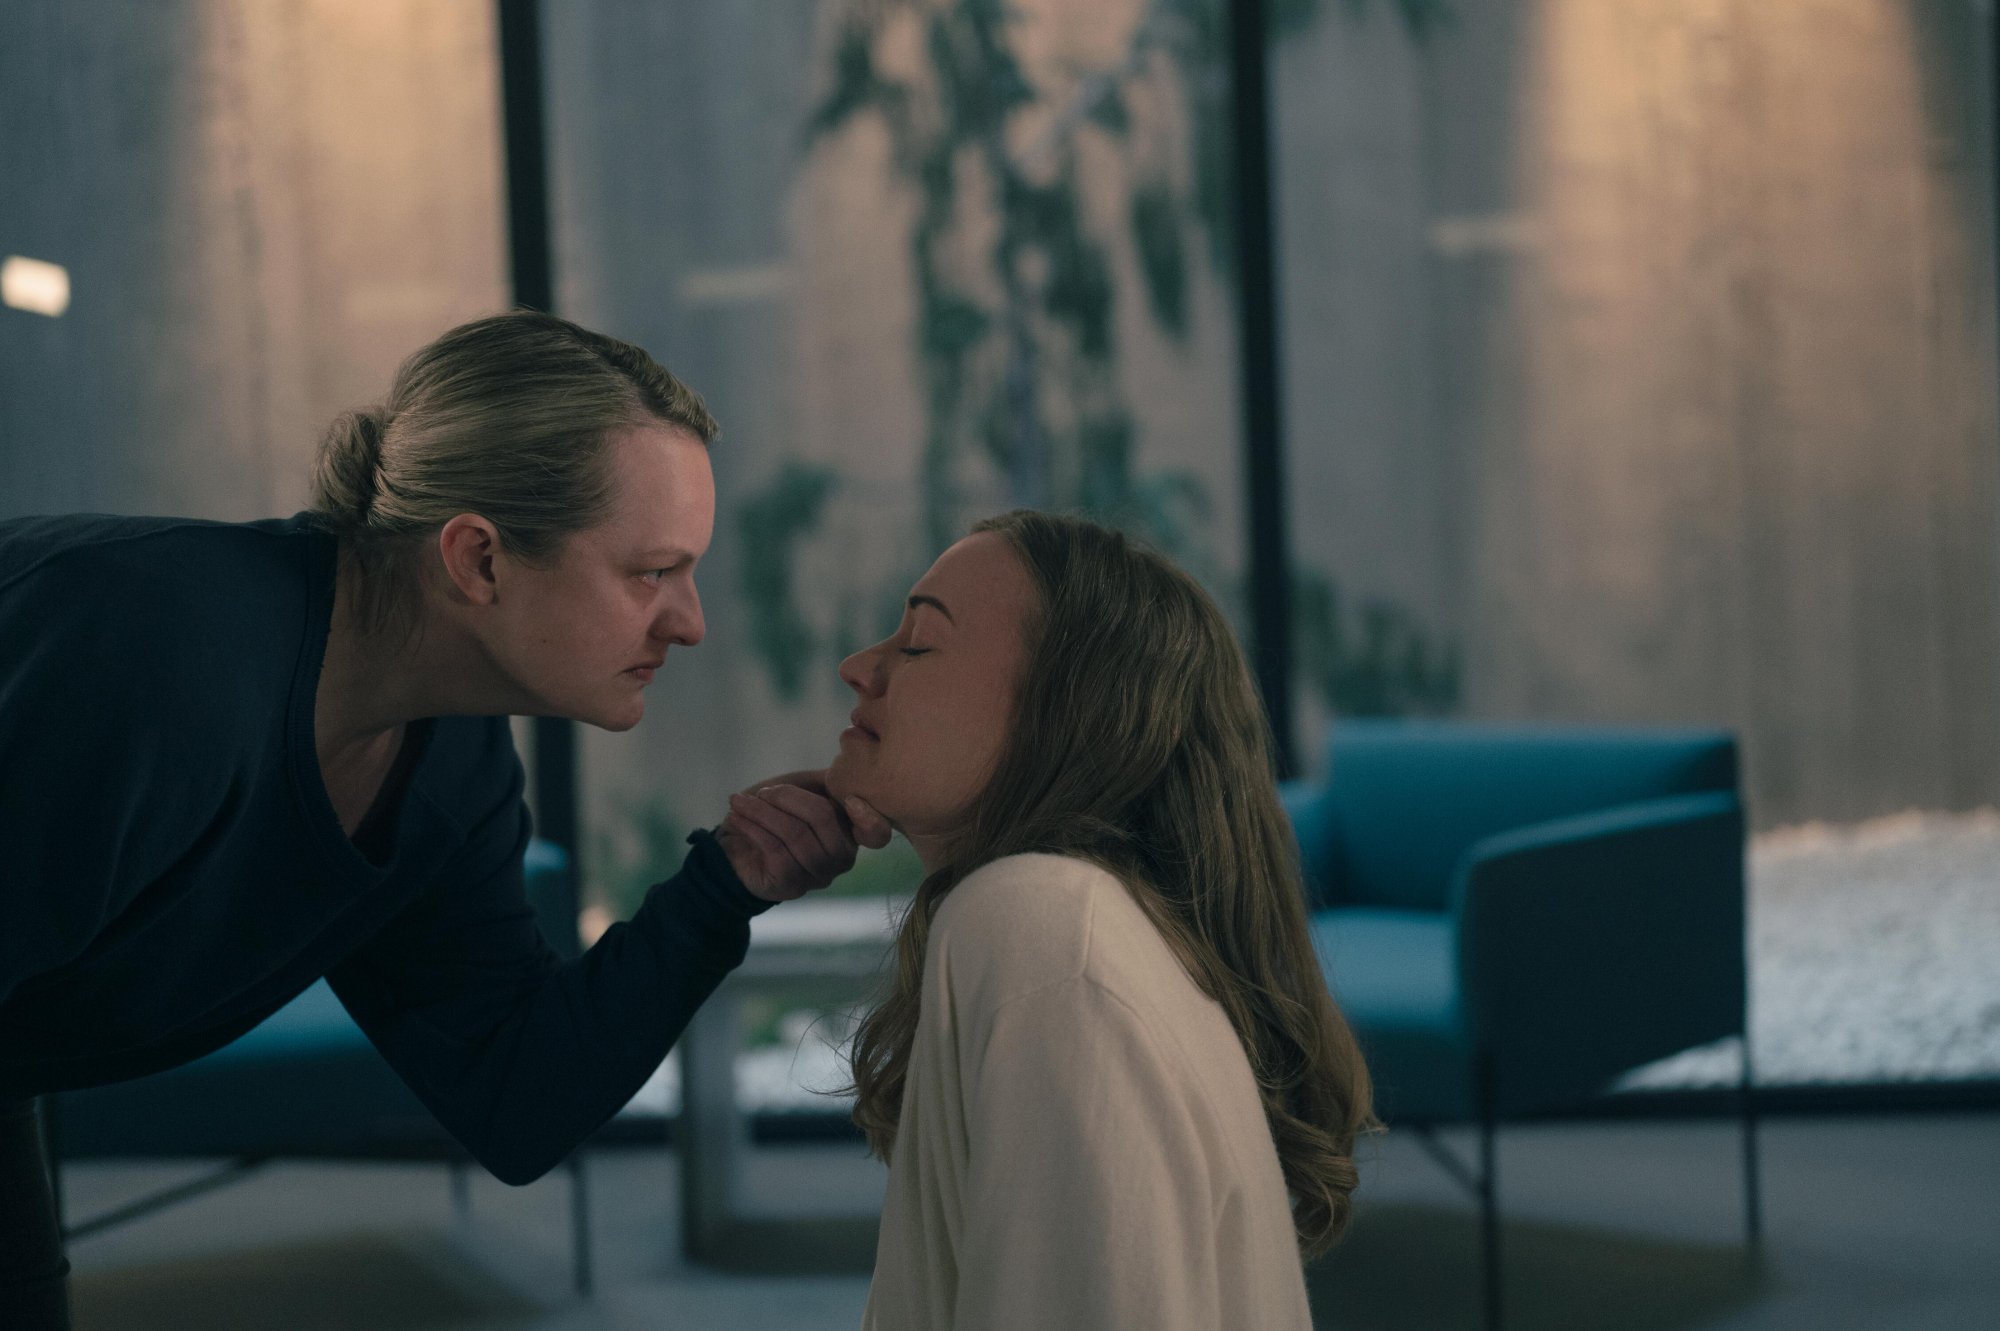 'The Handmaid's Tale' Elisabeth Moss as June and Yvonne Strahovski as Serena Waterford. Moss looks angrily at Strahovski while lifting her chin up.